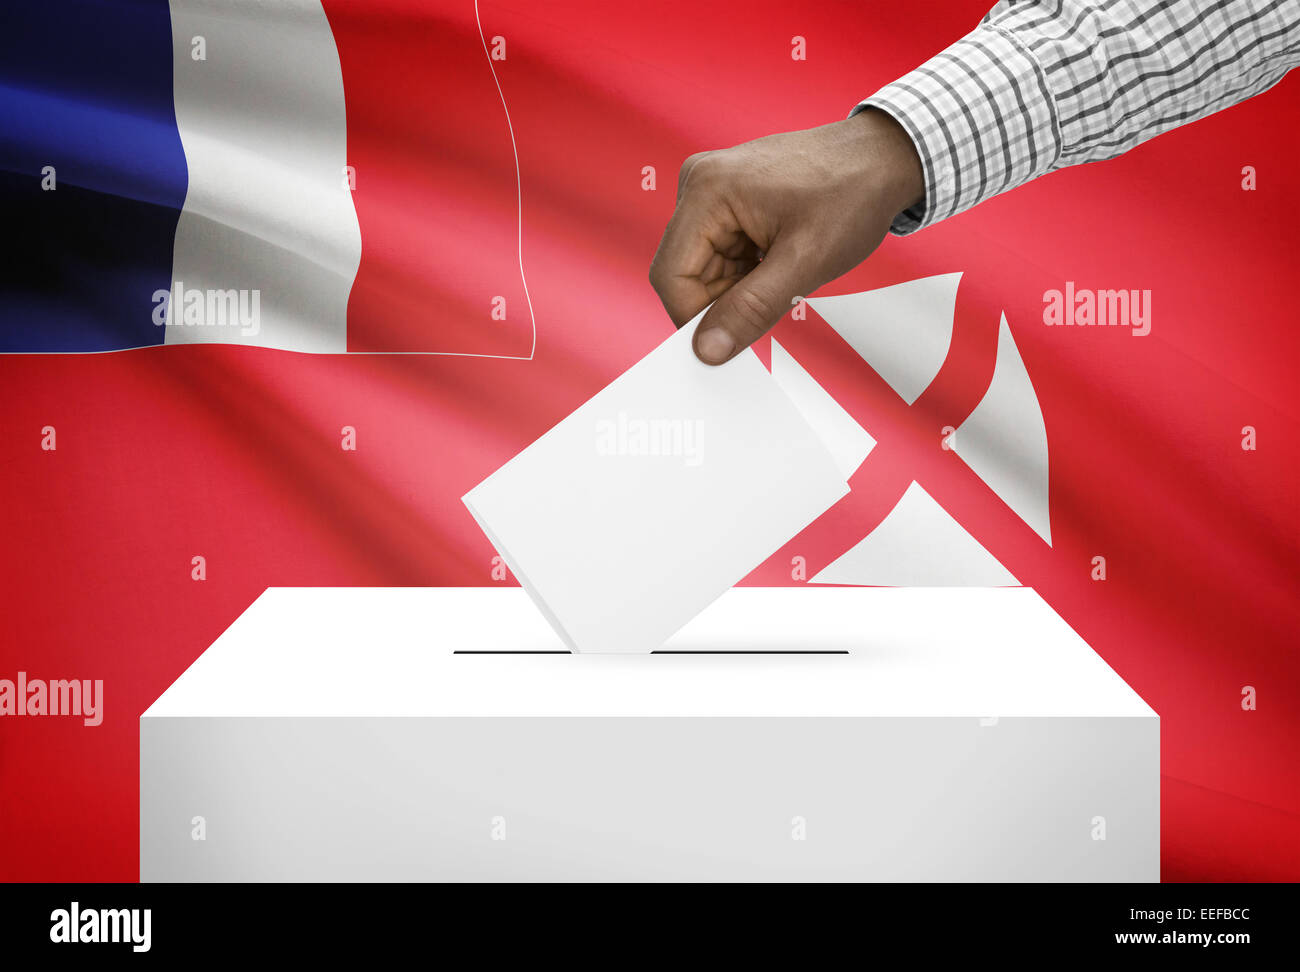 Ballot box with national flag on background - Territory of the Wallis and Futuna Islands Stock Photo